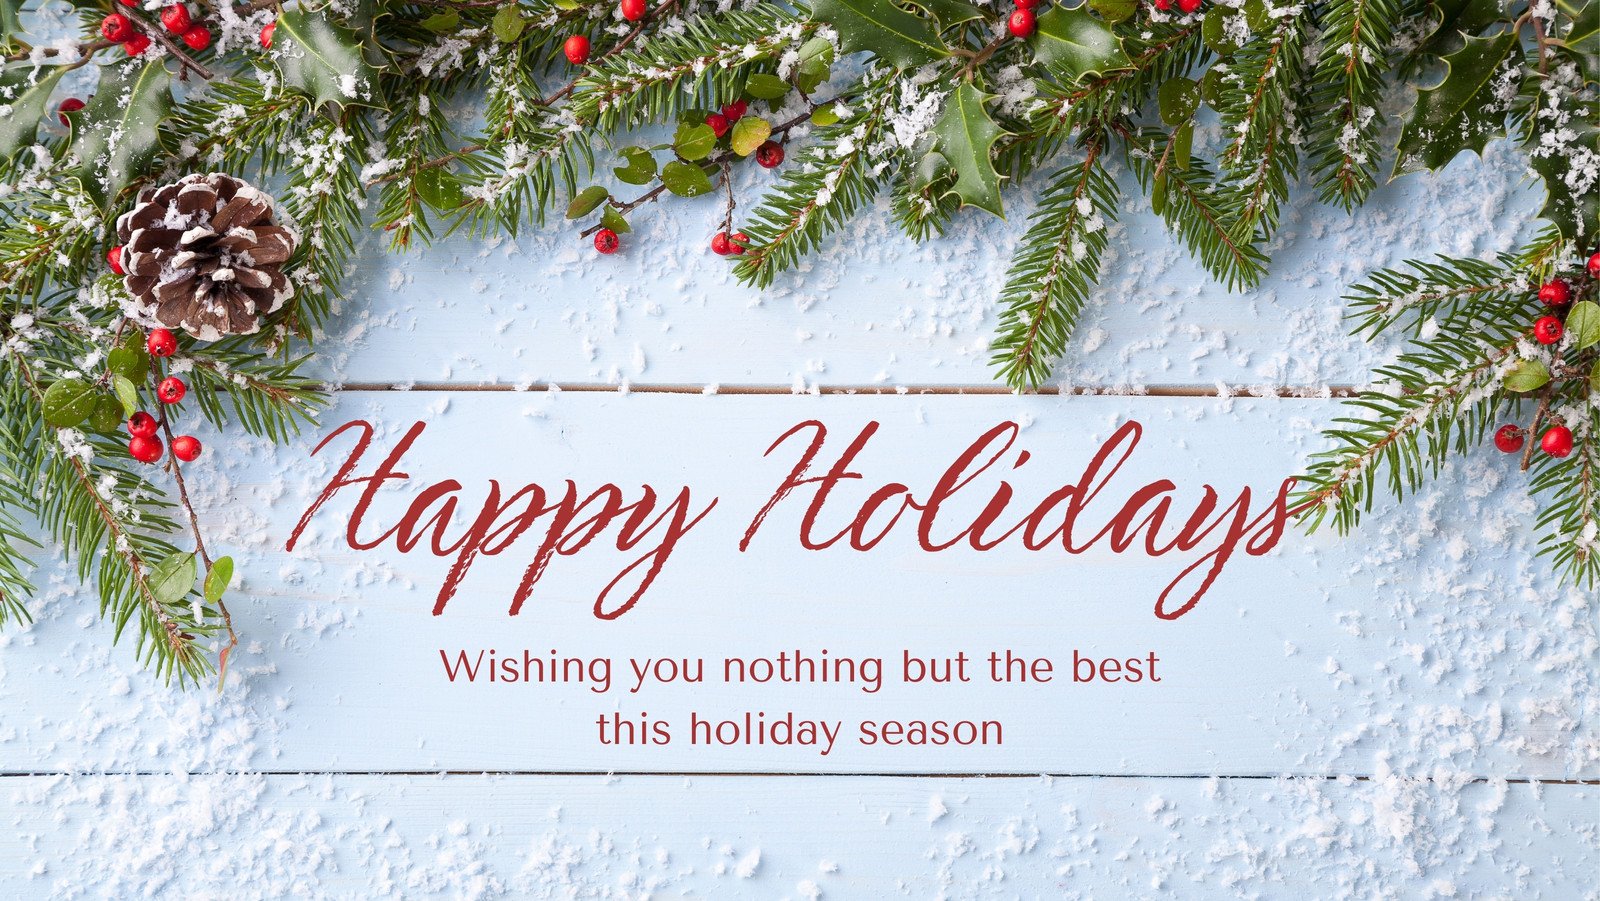 happy holidays facebook covers